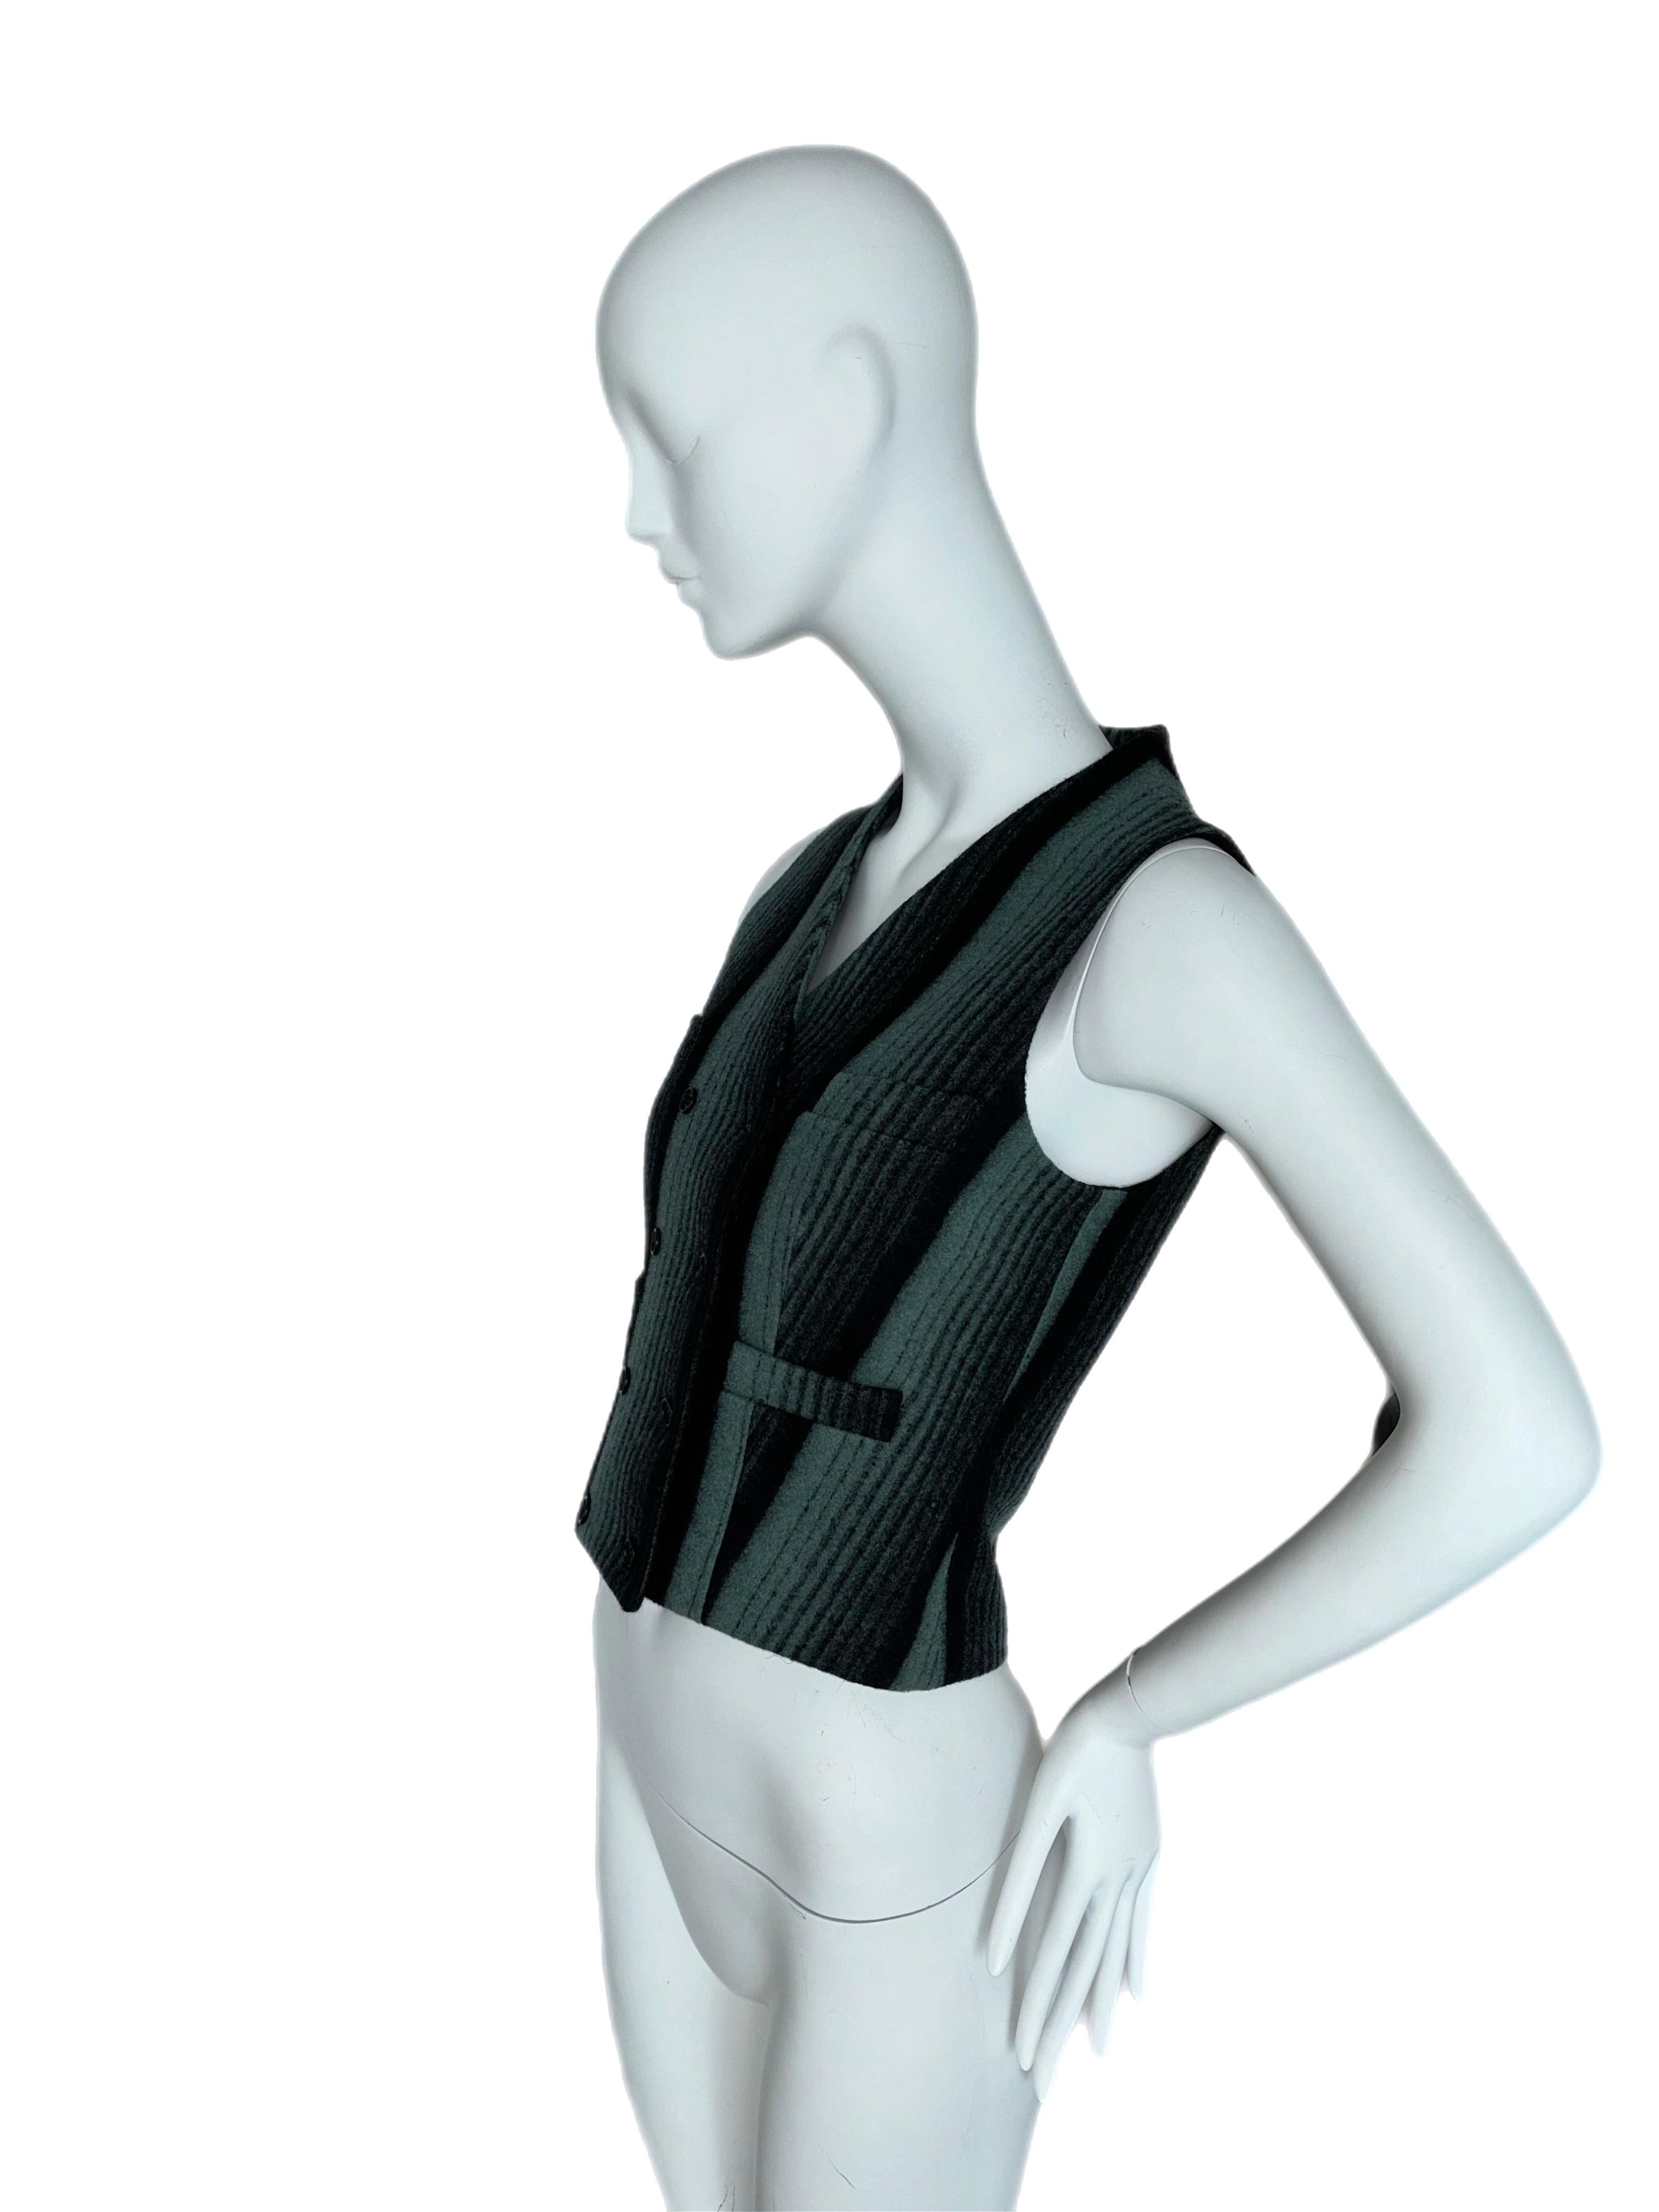 Alexander McQueen
Vintage
1990's
IT42
Excellent condition, no flaws
100% wool
Double-breasted

I would personally wear this vest with low-rise, low slung, looser jeans, and pair with kitten heels. I would keep the hair effortless and wear naturally